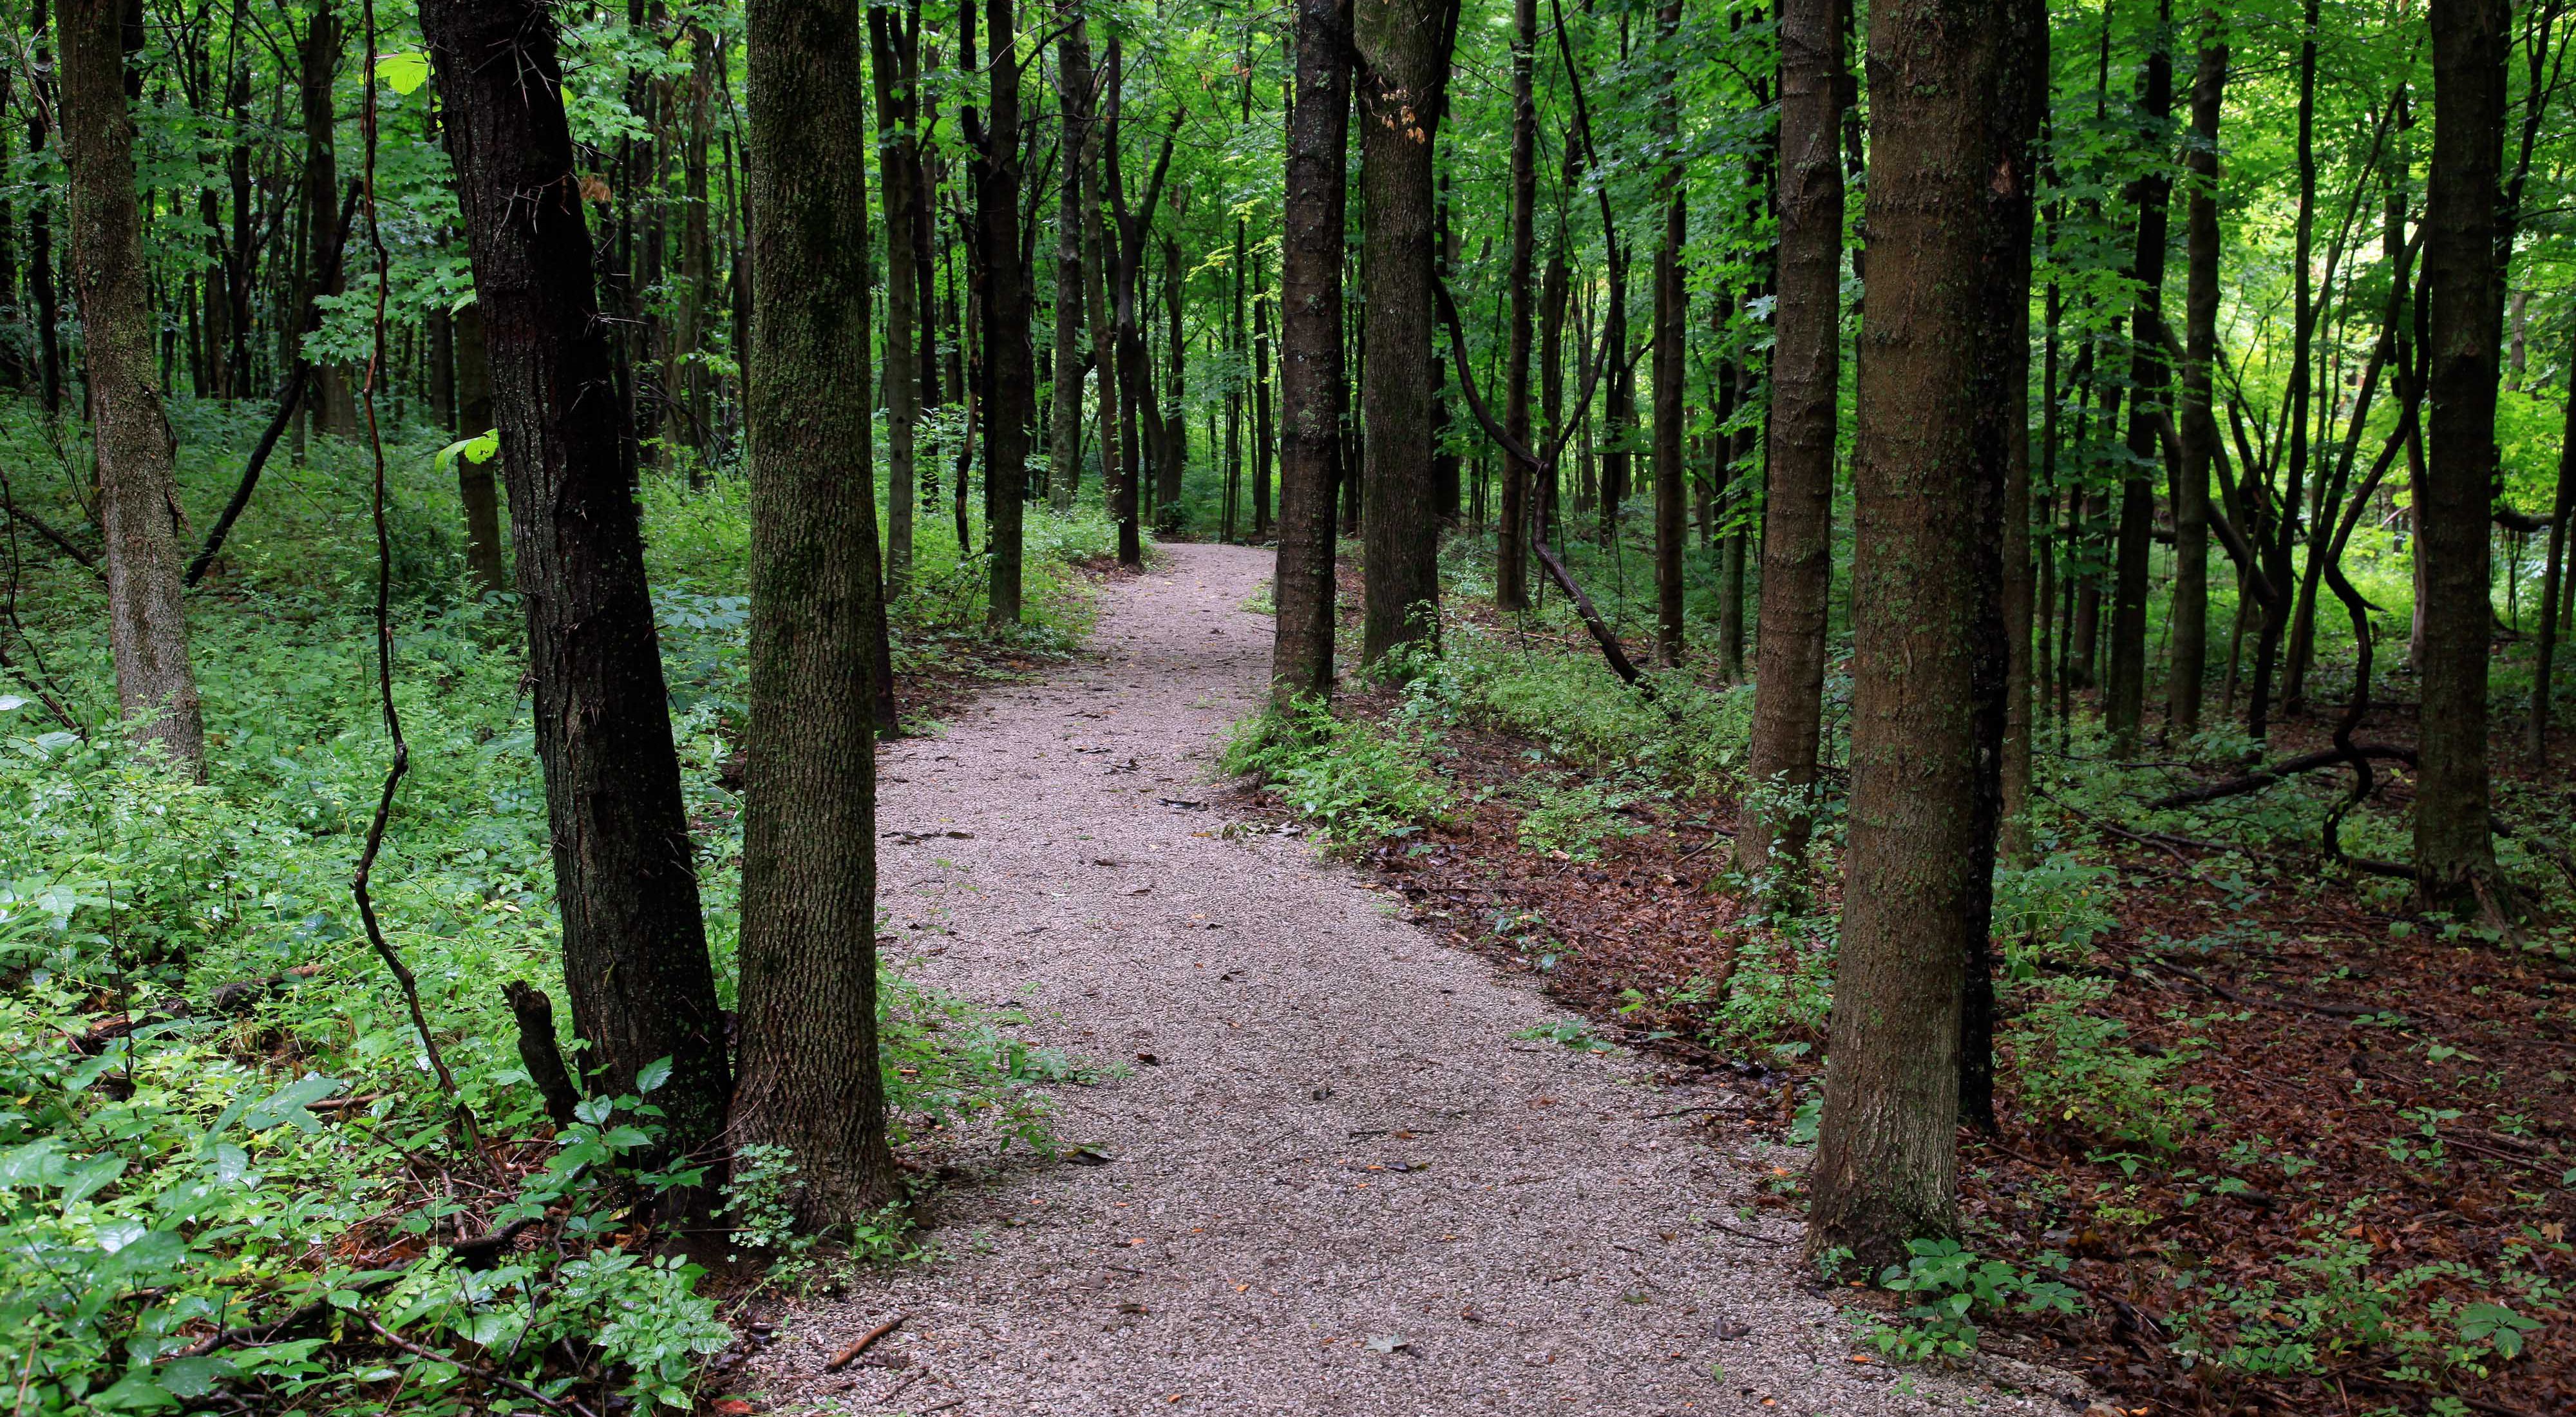 Gravel trail winds through lush green forest.